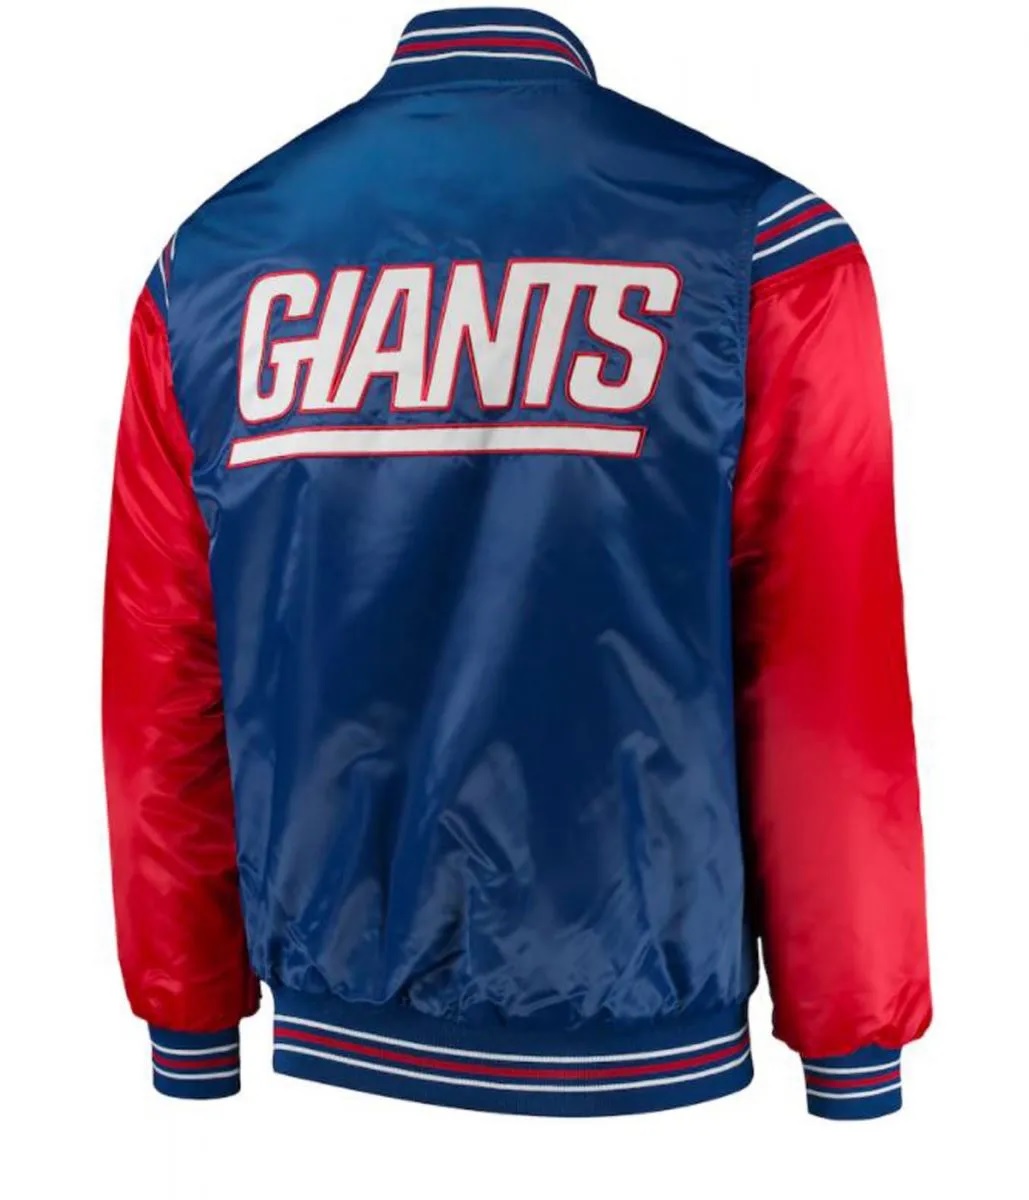 New York Giants Satin Red and Blue Jacket